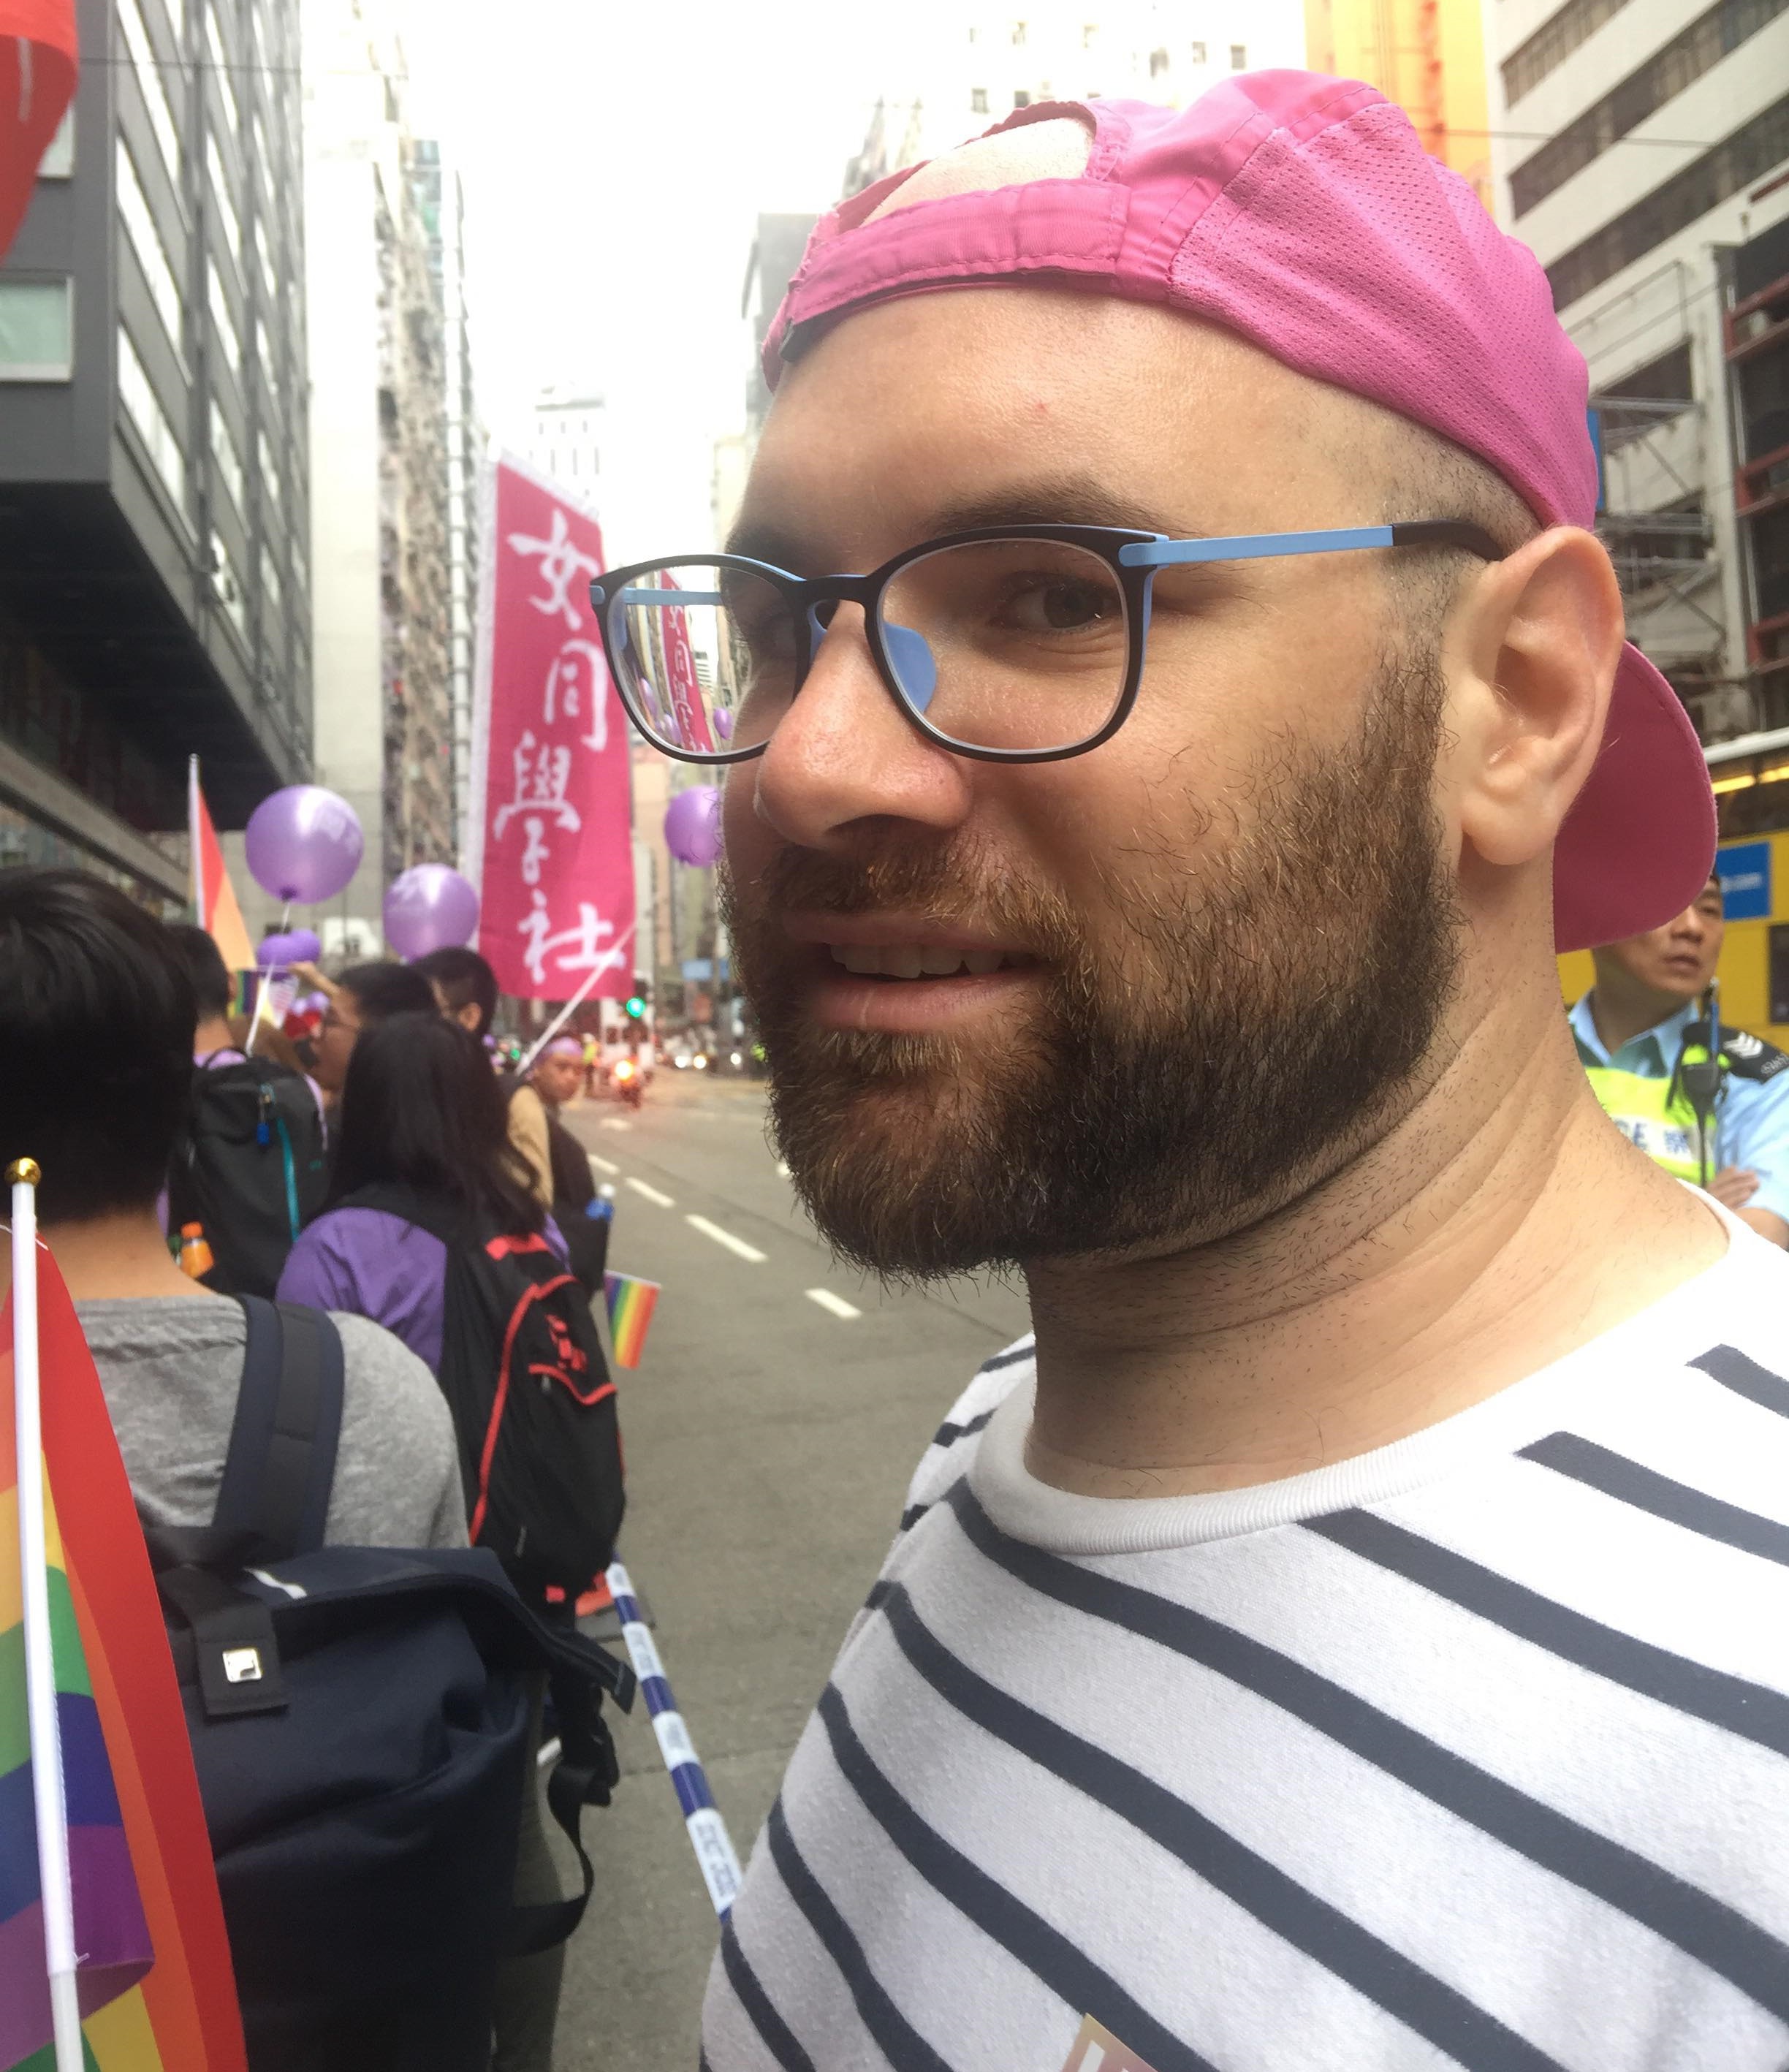 An image of the creator in this page: a Caucasian man with glasses, a short beard, and wearing a pink cap backwards. In the background of the image is a sign that reads 女同學社